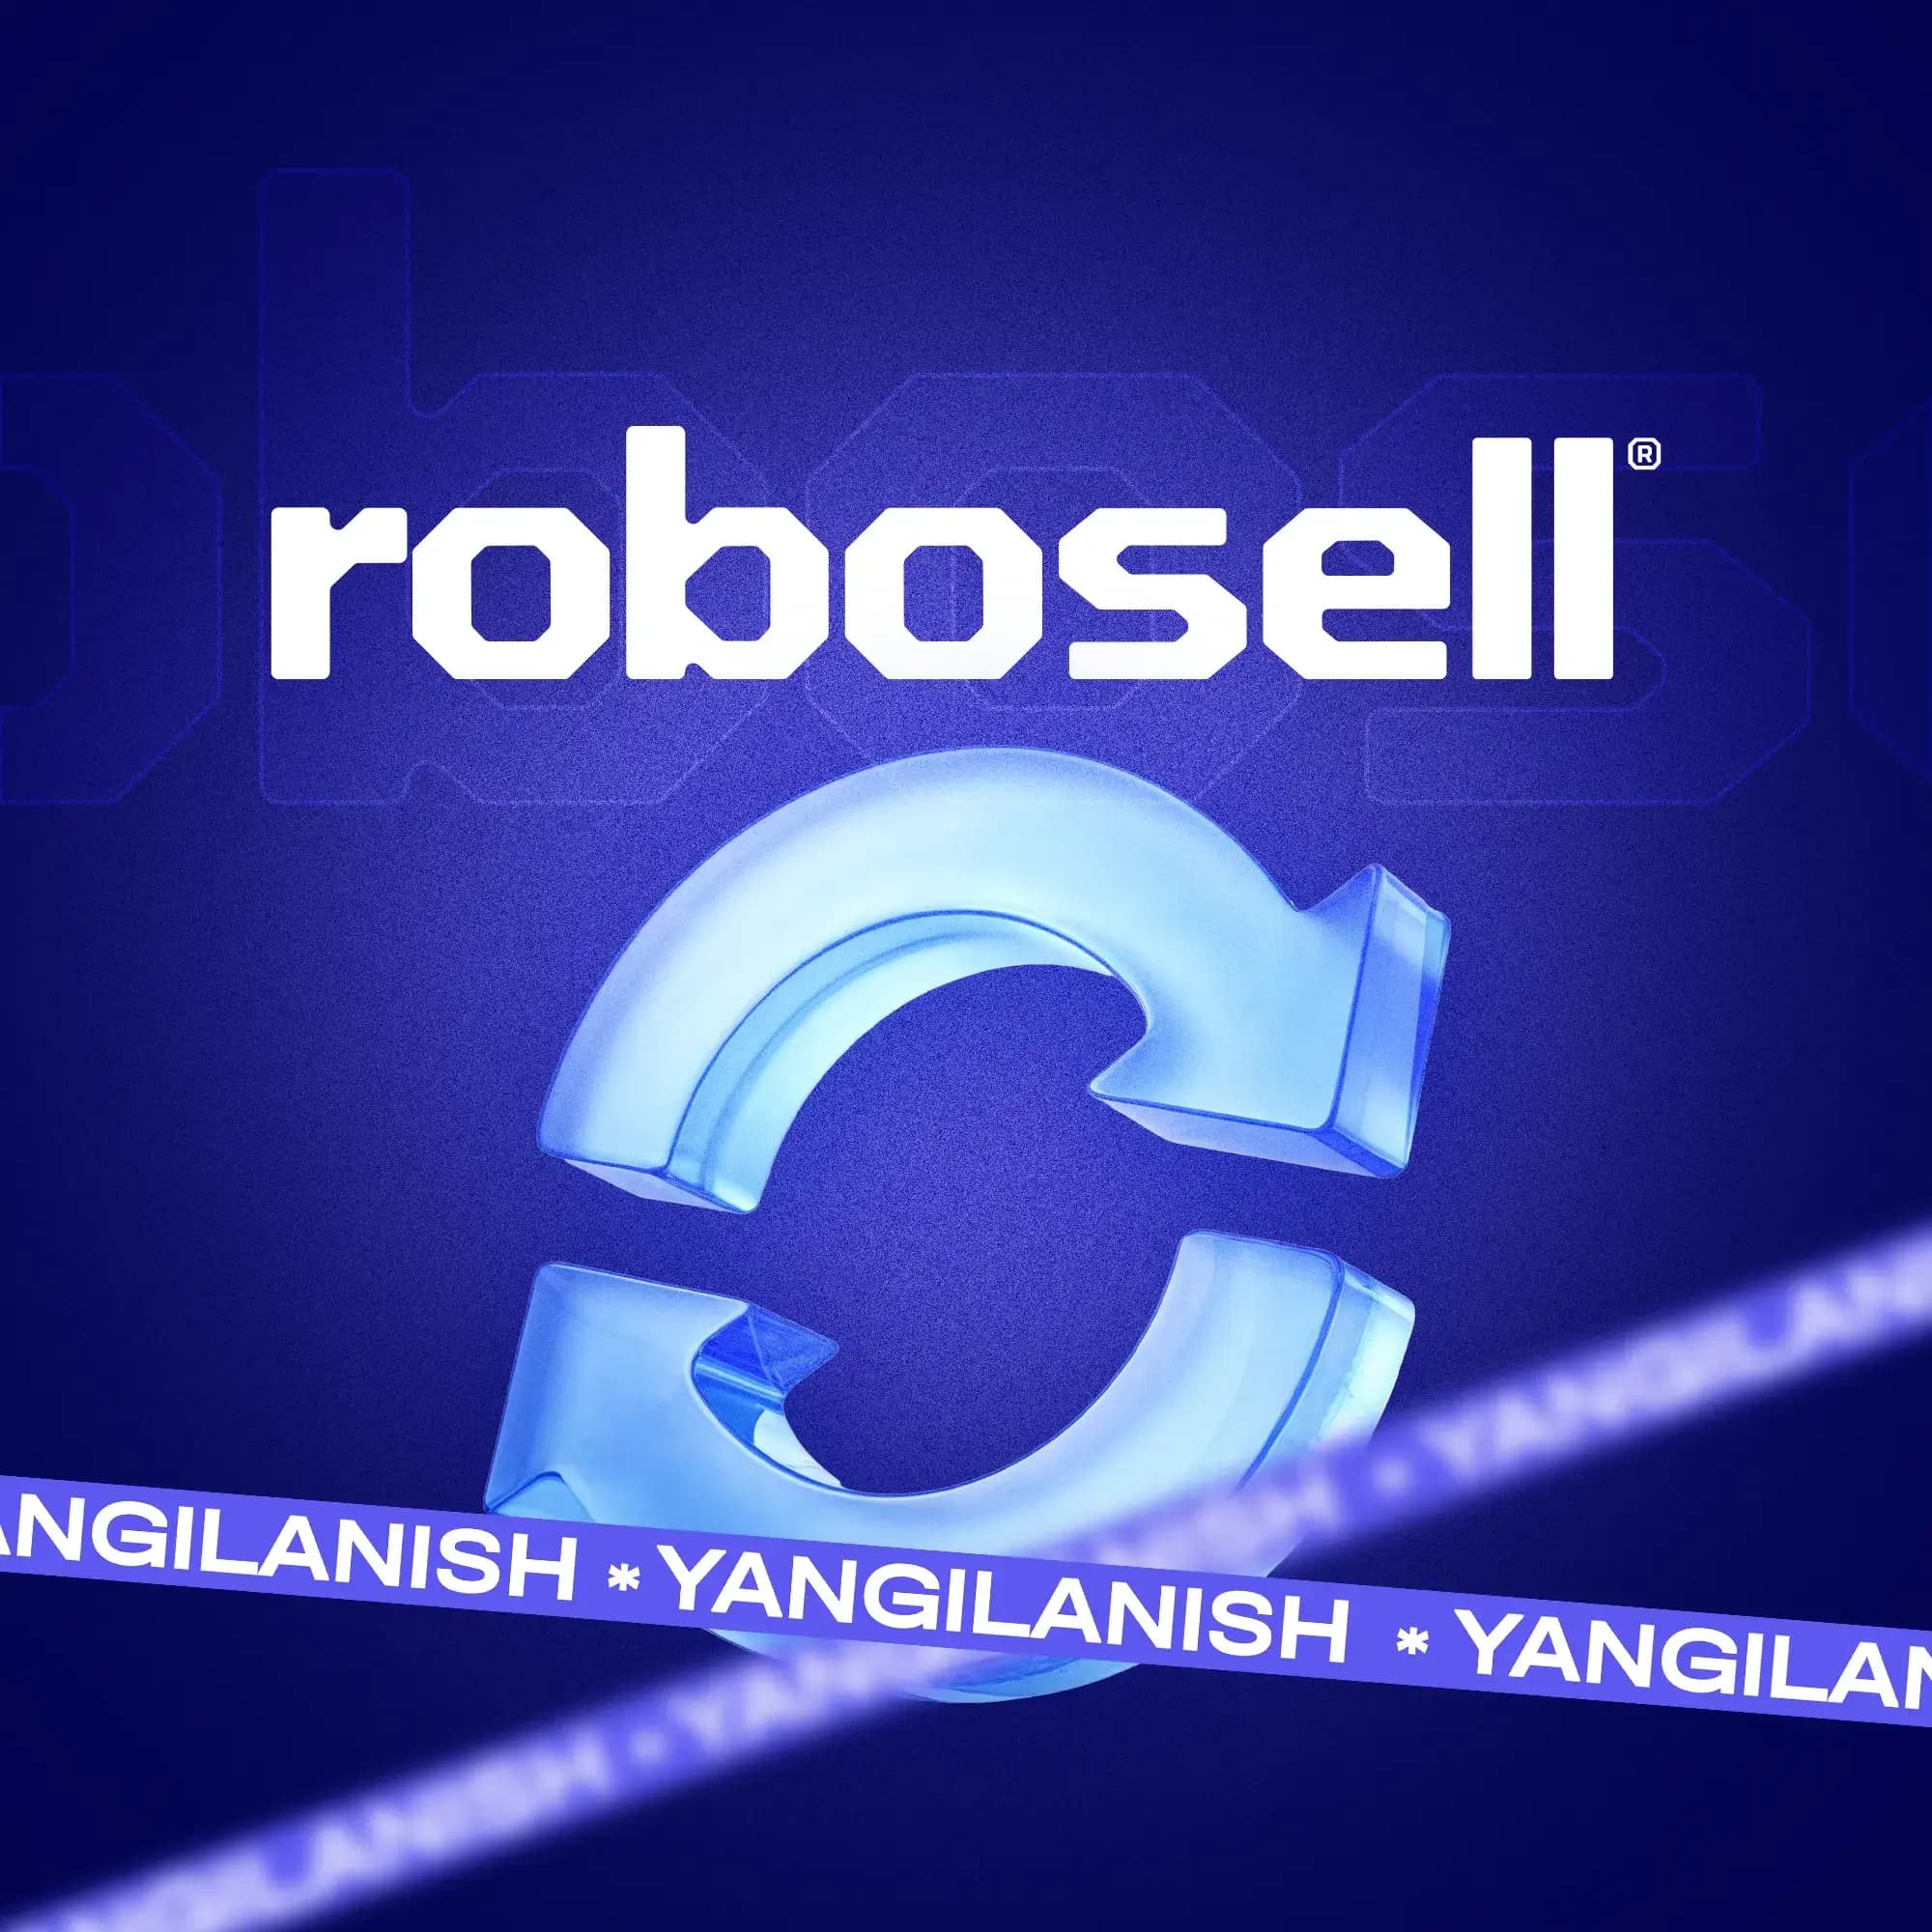 second_version_of_robosell_uz_adding_features_and_changing_design